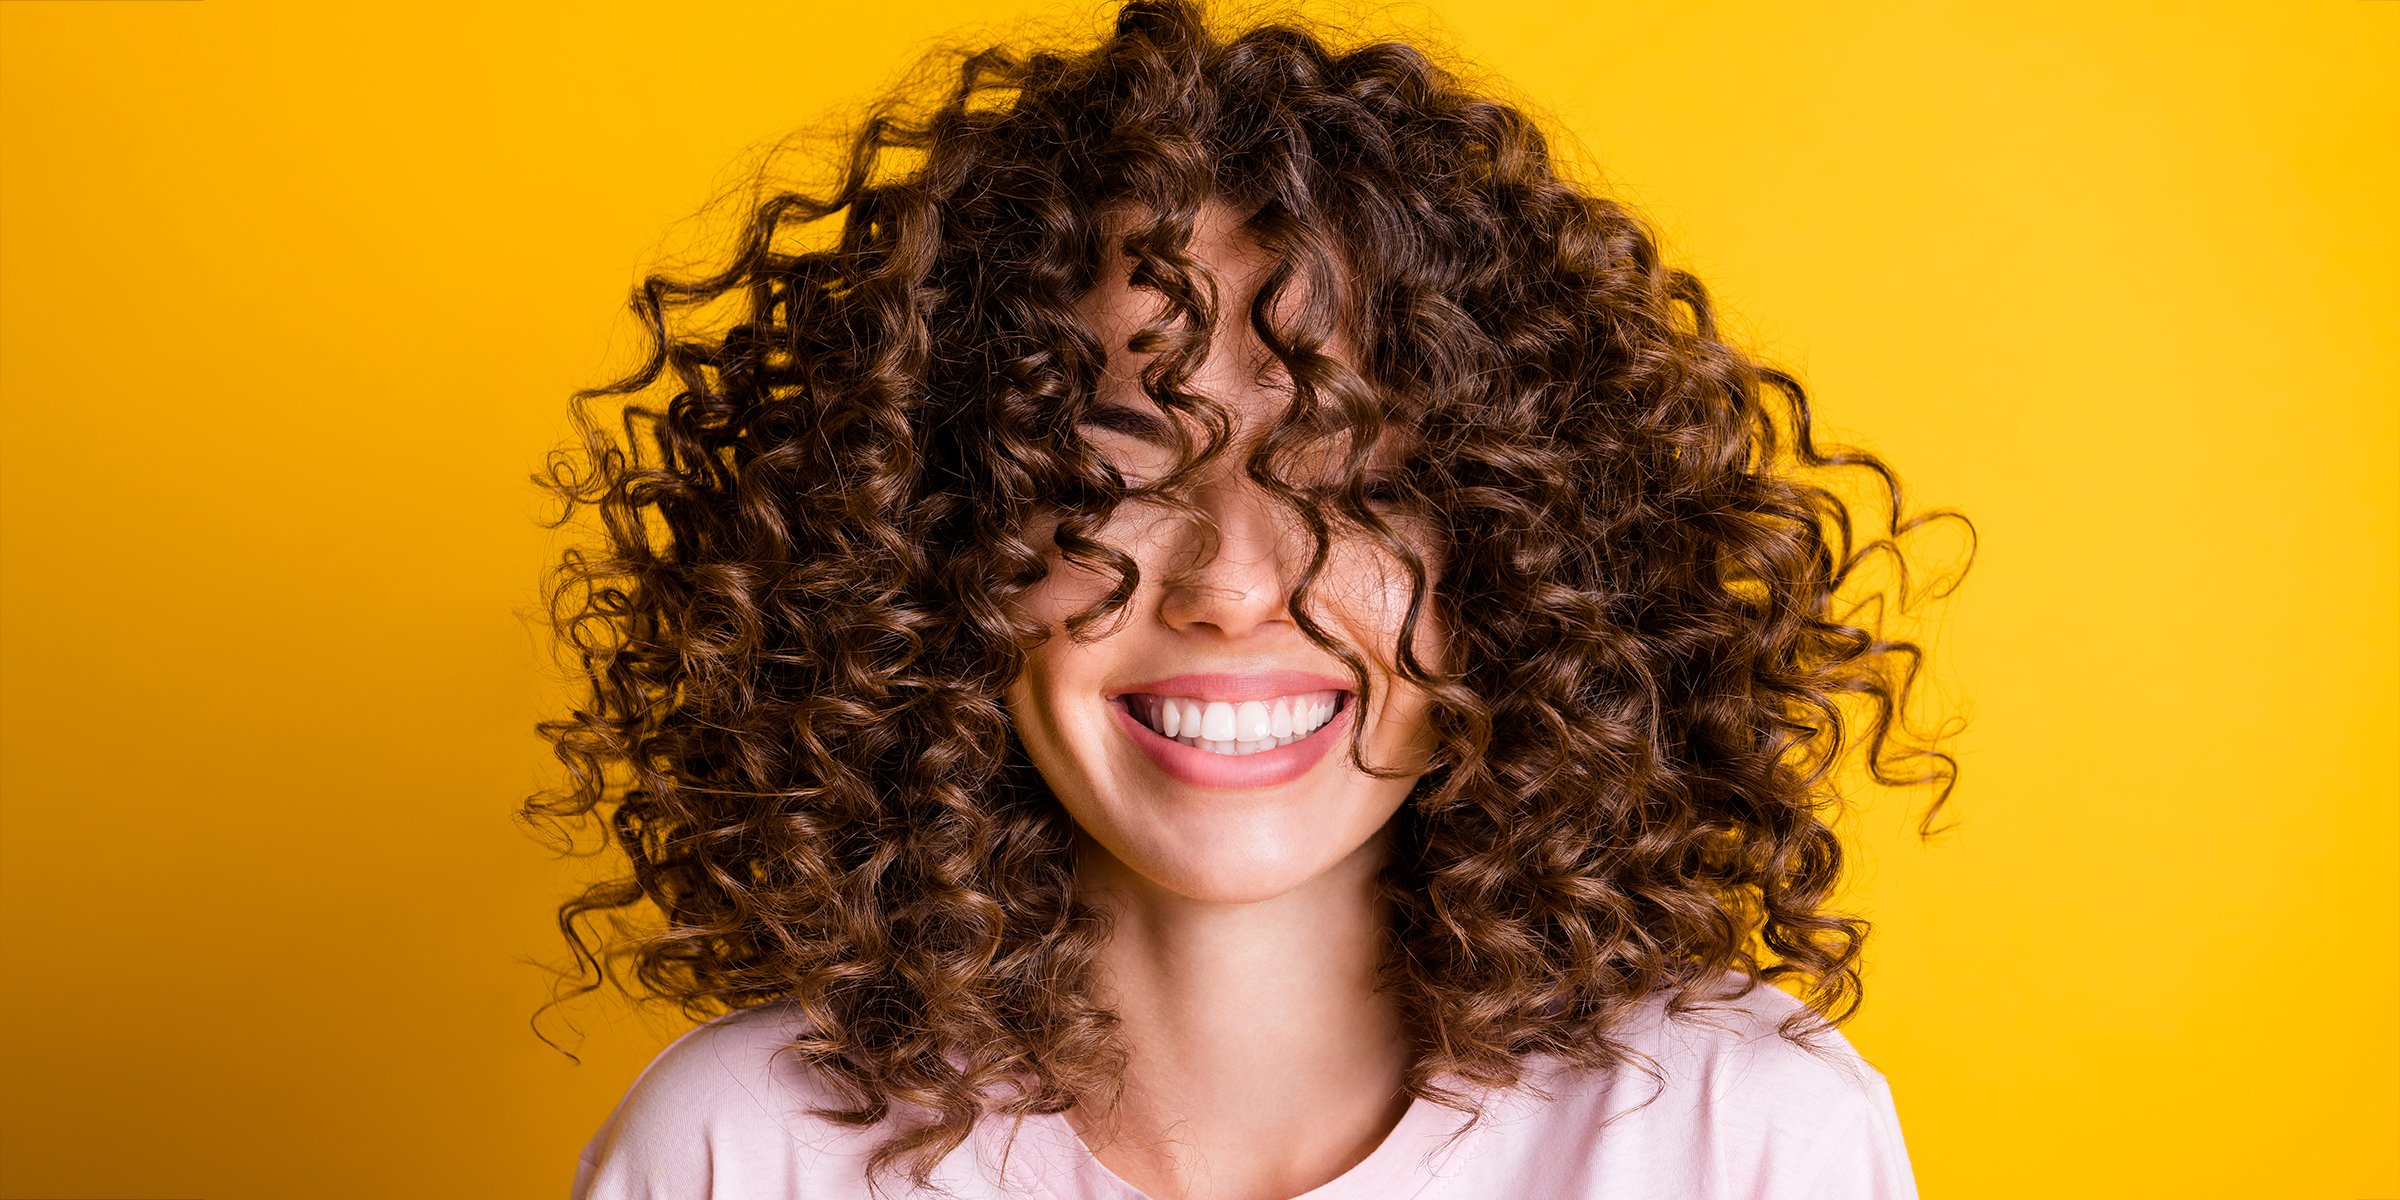 A Woman with Type 3A Hair Smiling with Her Eyes Closed | Source: Shutterstock